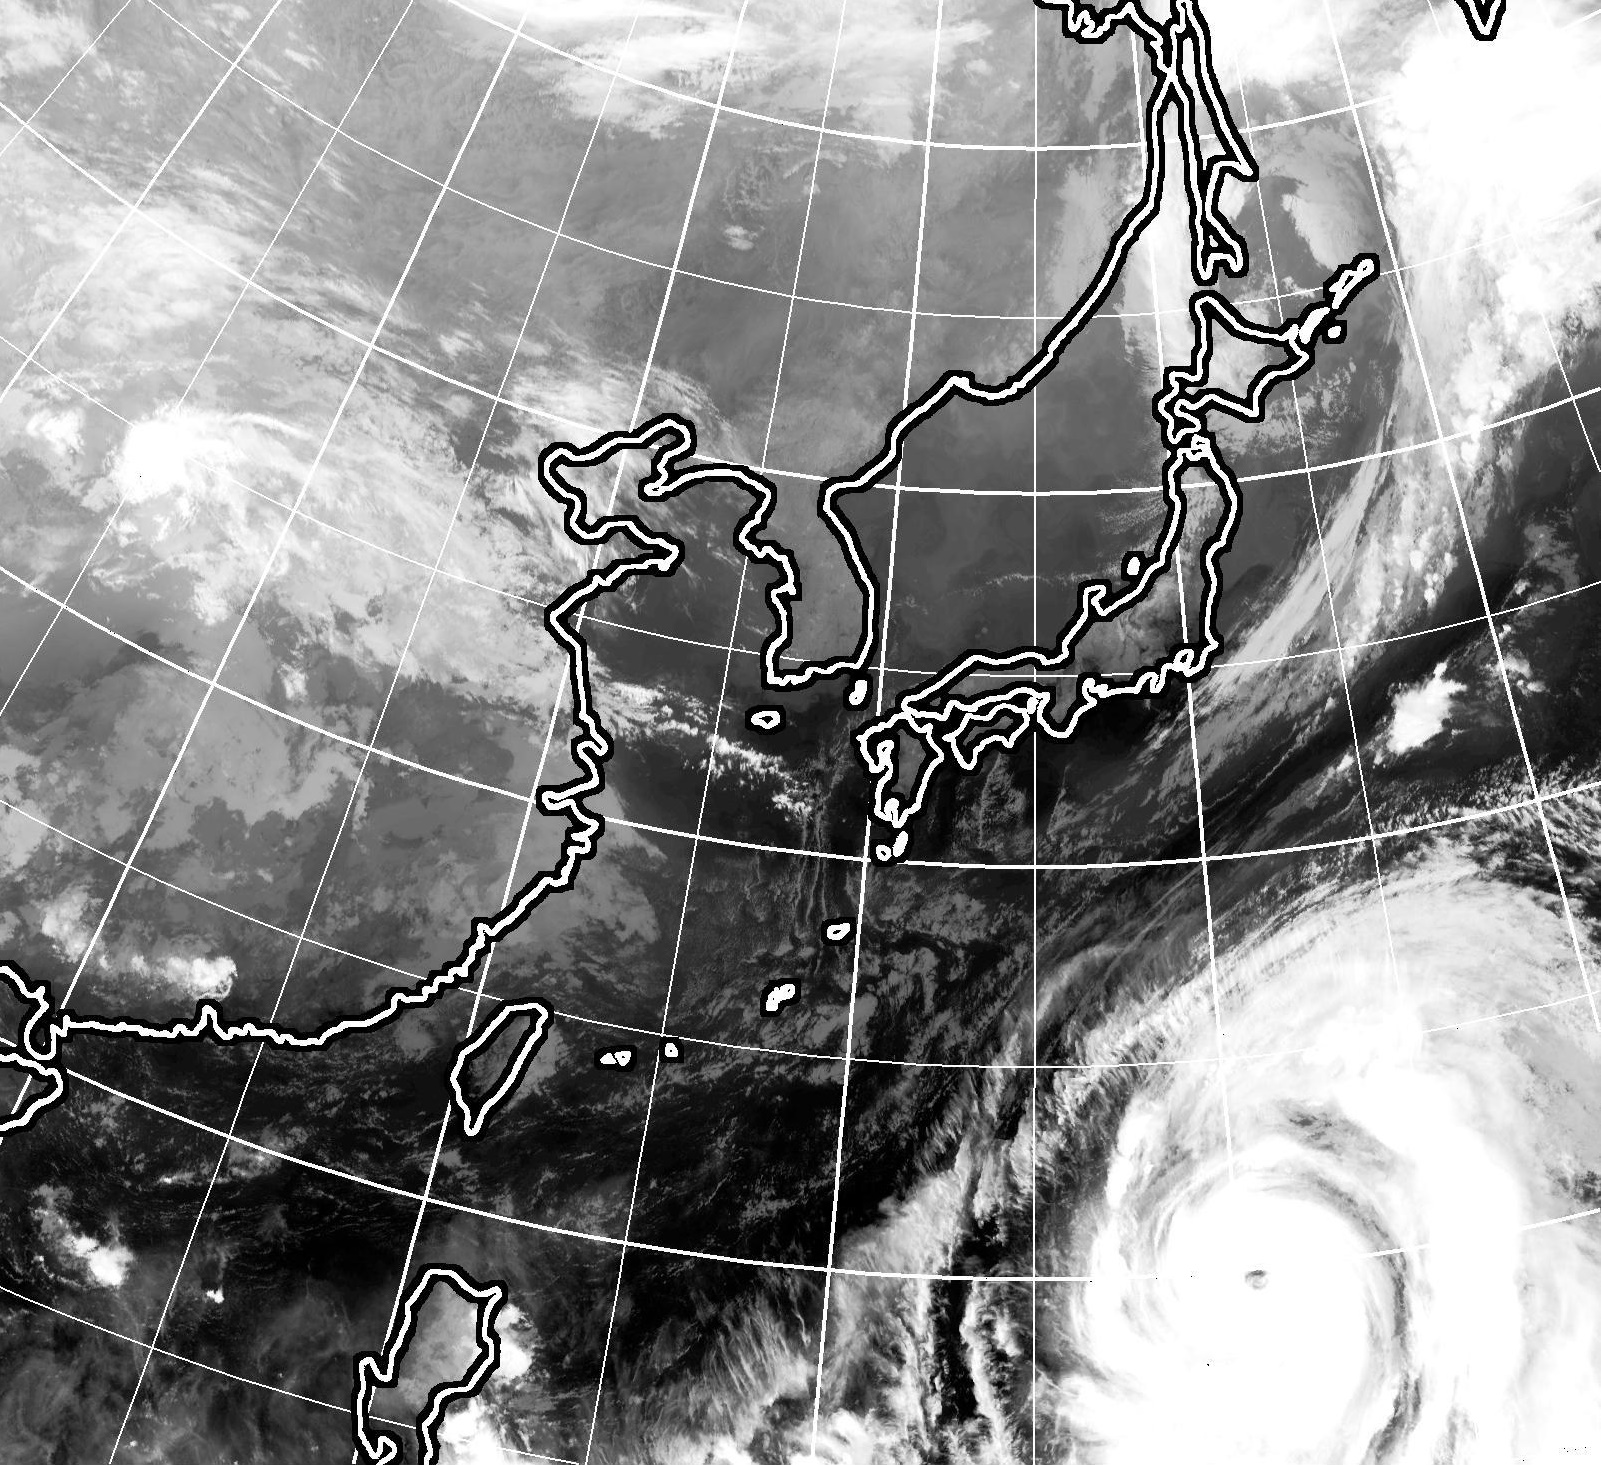 An image captured by the Himawari-8 weather satellite shows Typhoon Hagibis located in the south of Japan as of 9 a.m. Wednesday. | KYODO